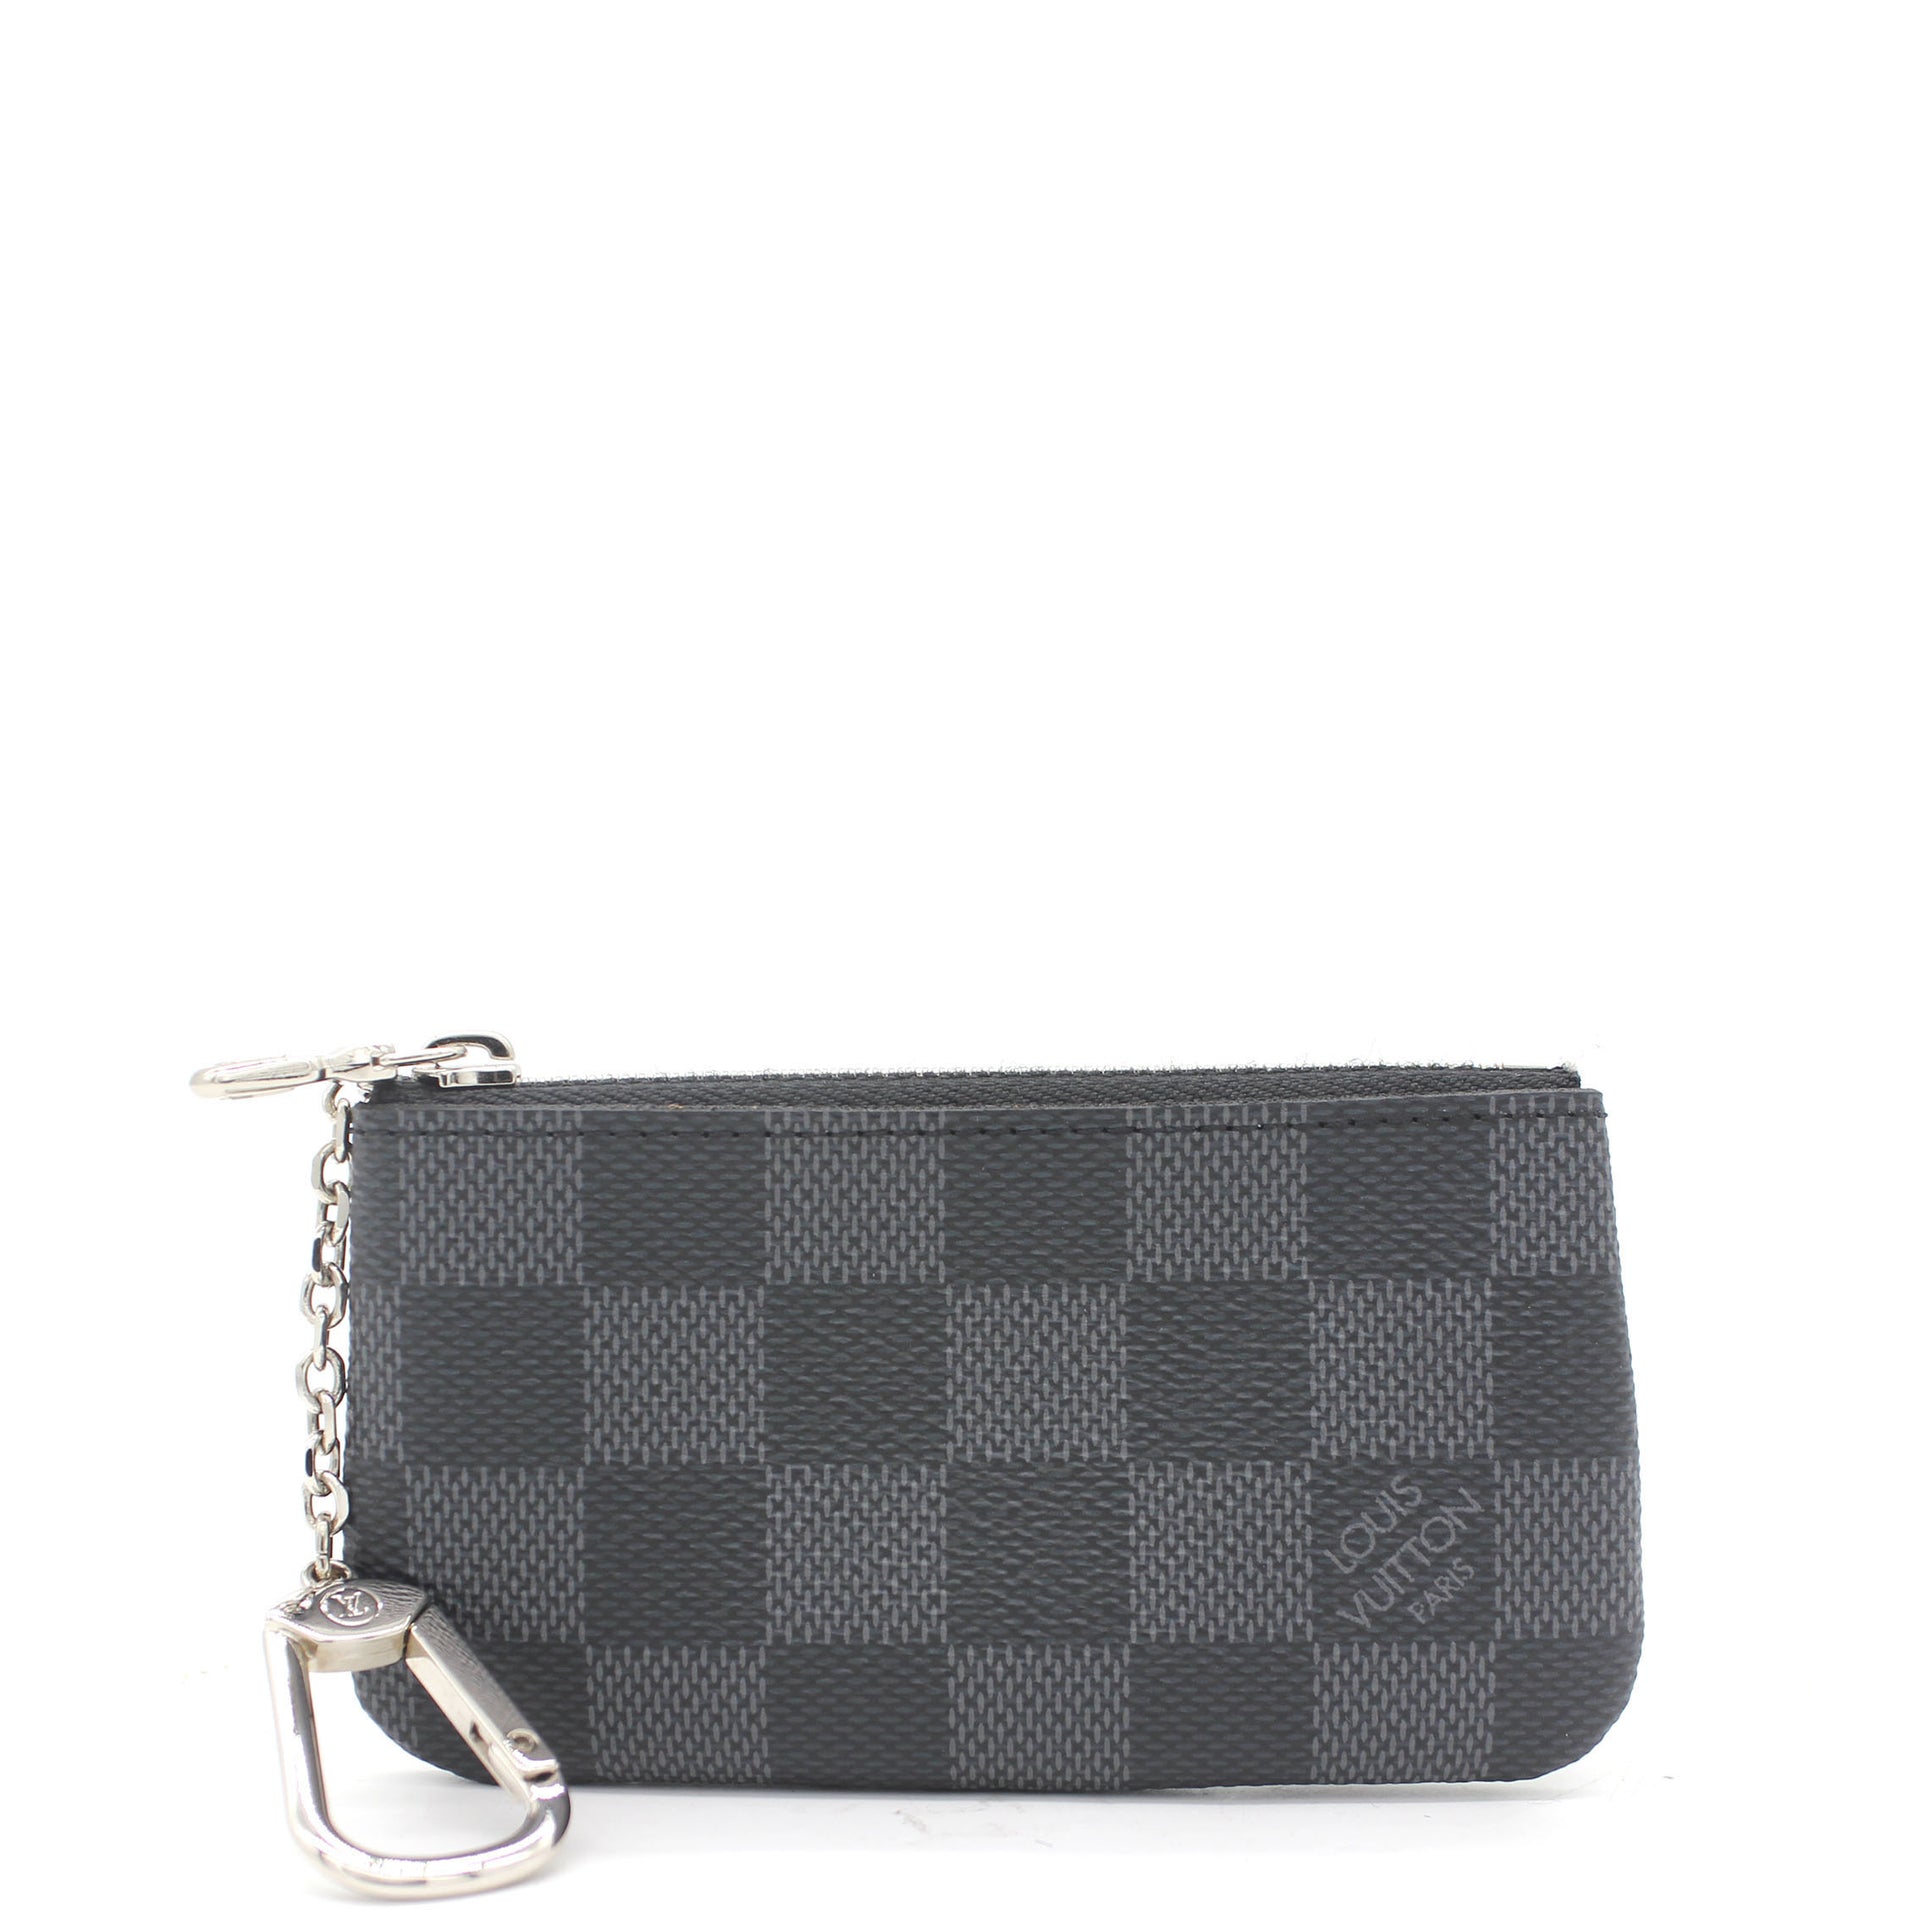 Louis Vuitton: Into The World Of The Handy Pocket Organiser